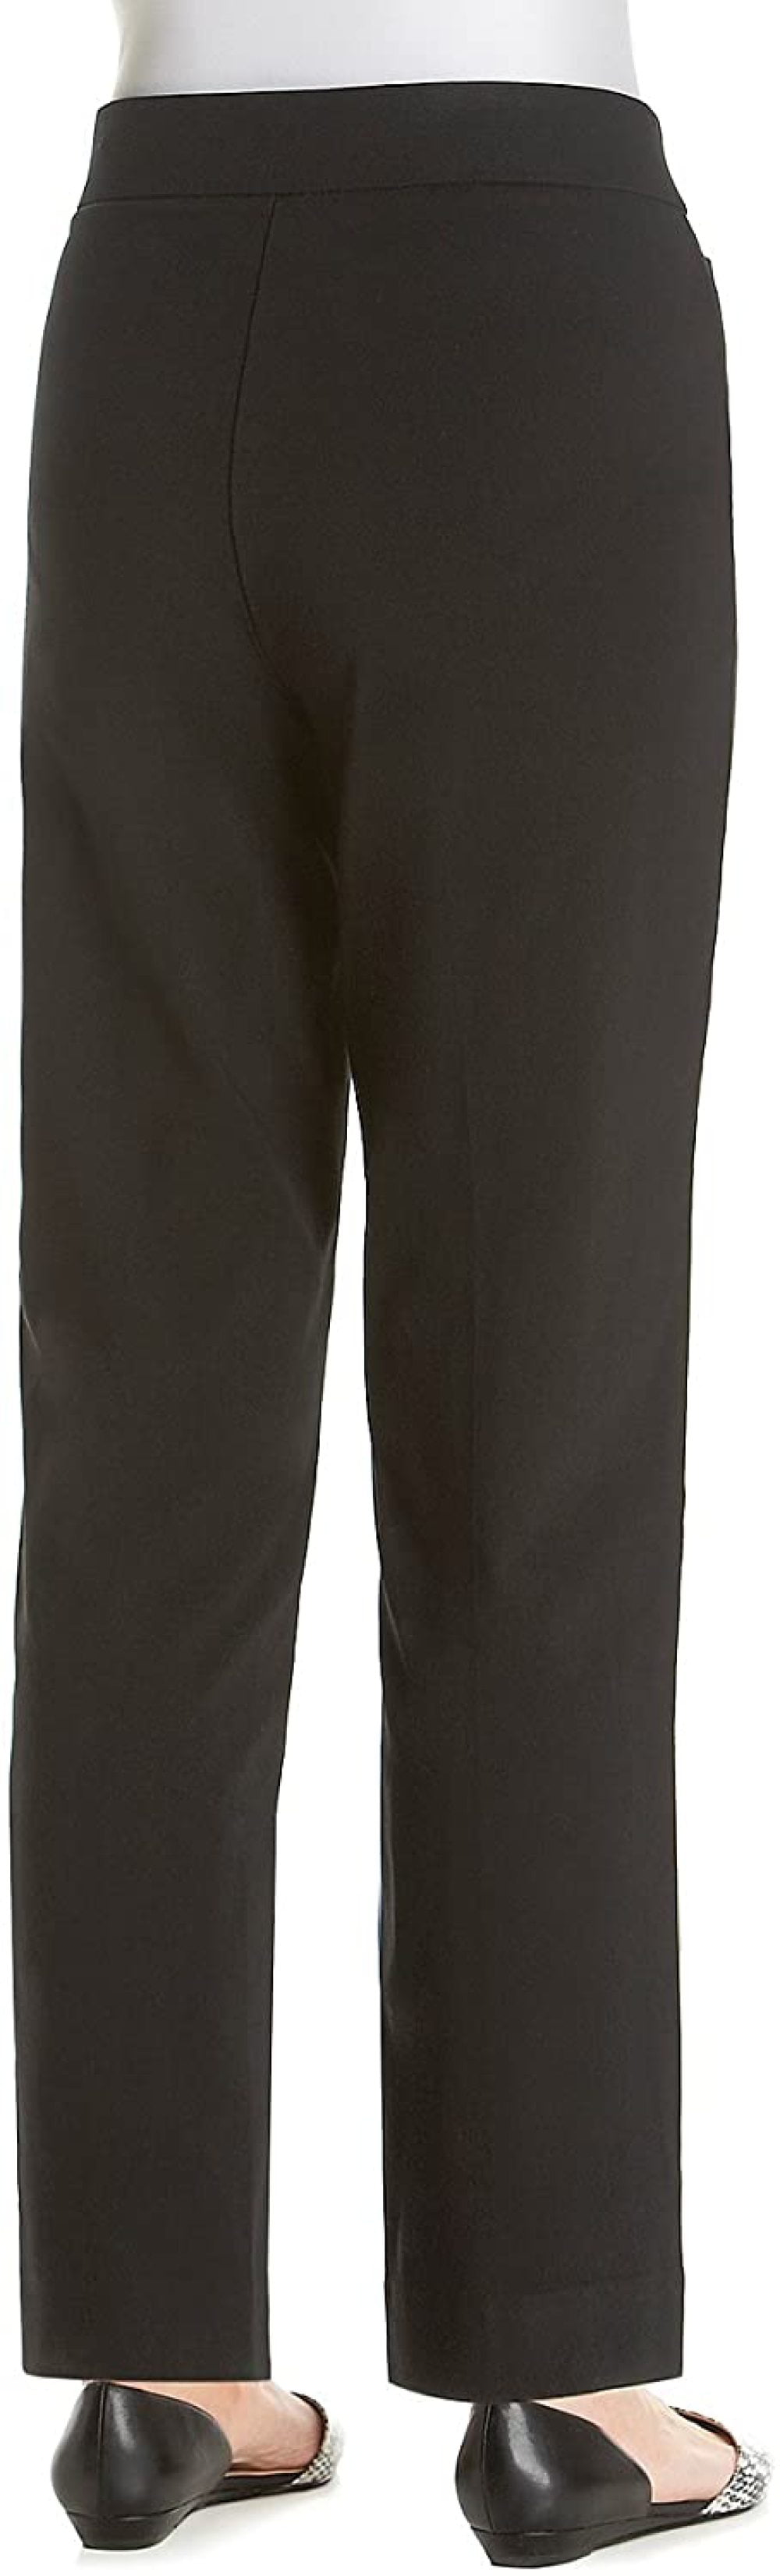 Alfred Dunner Women's Allure Slimming Missy Stretch Pants-Modern Fit 